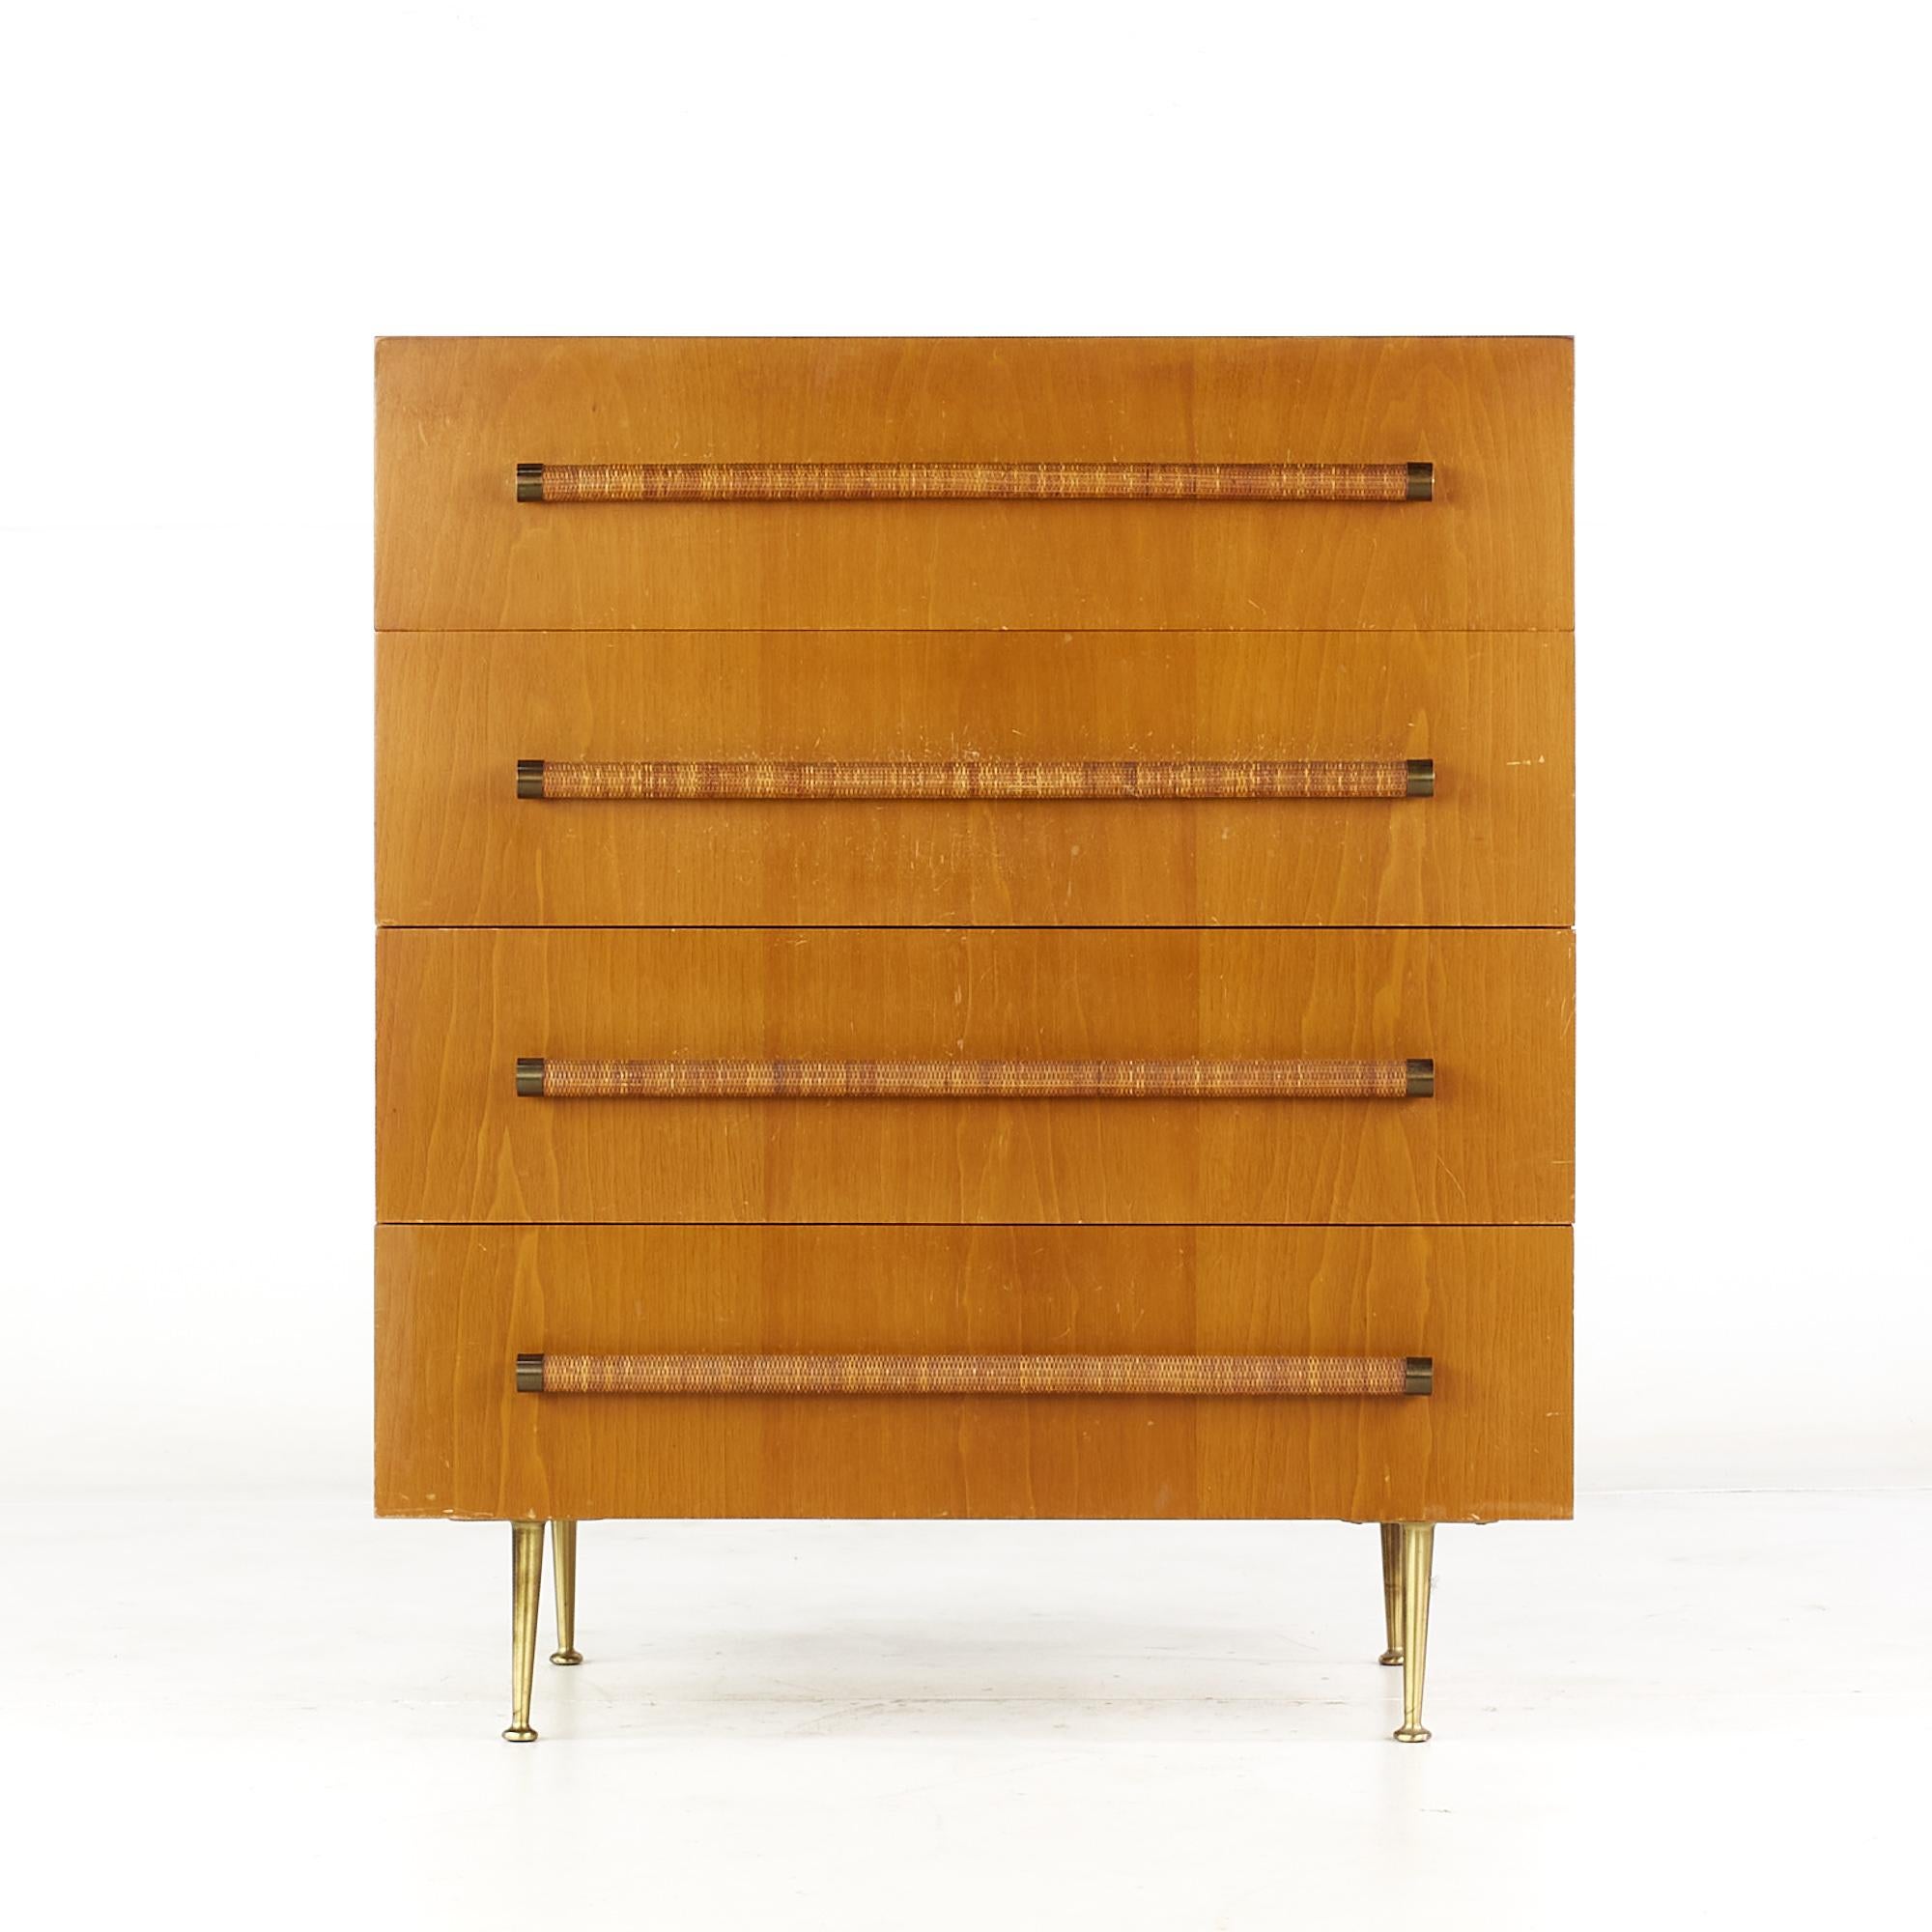 Robsjohn gibbings for widdicomb mid century 4 drawer walnut cane and brass highboy dresser.

This highboy dresser measures: 34.5 wide x 21.25 deep x 40.75 inches high.

All pieces of furniture can be had in what we call restored vintage